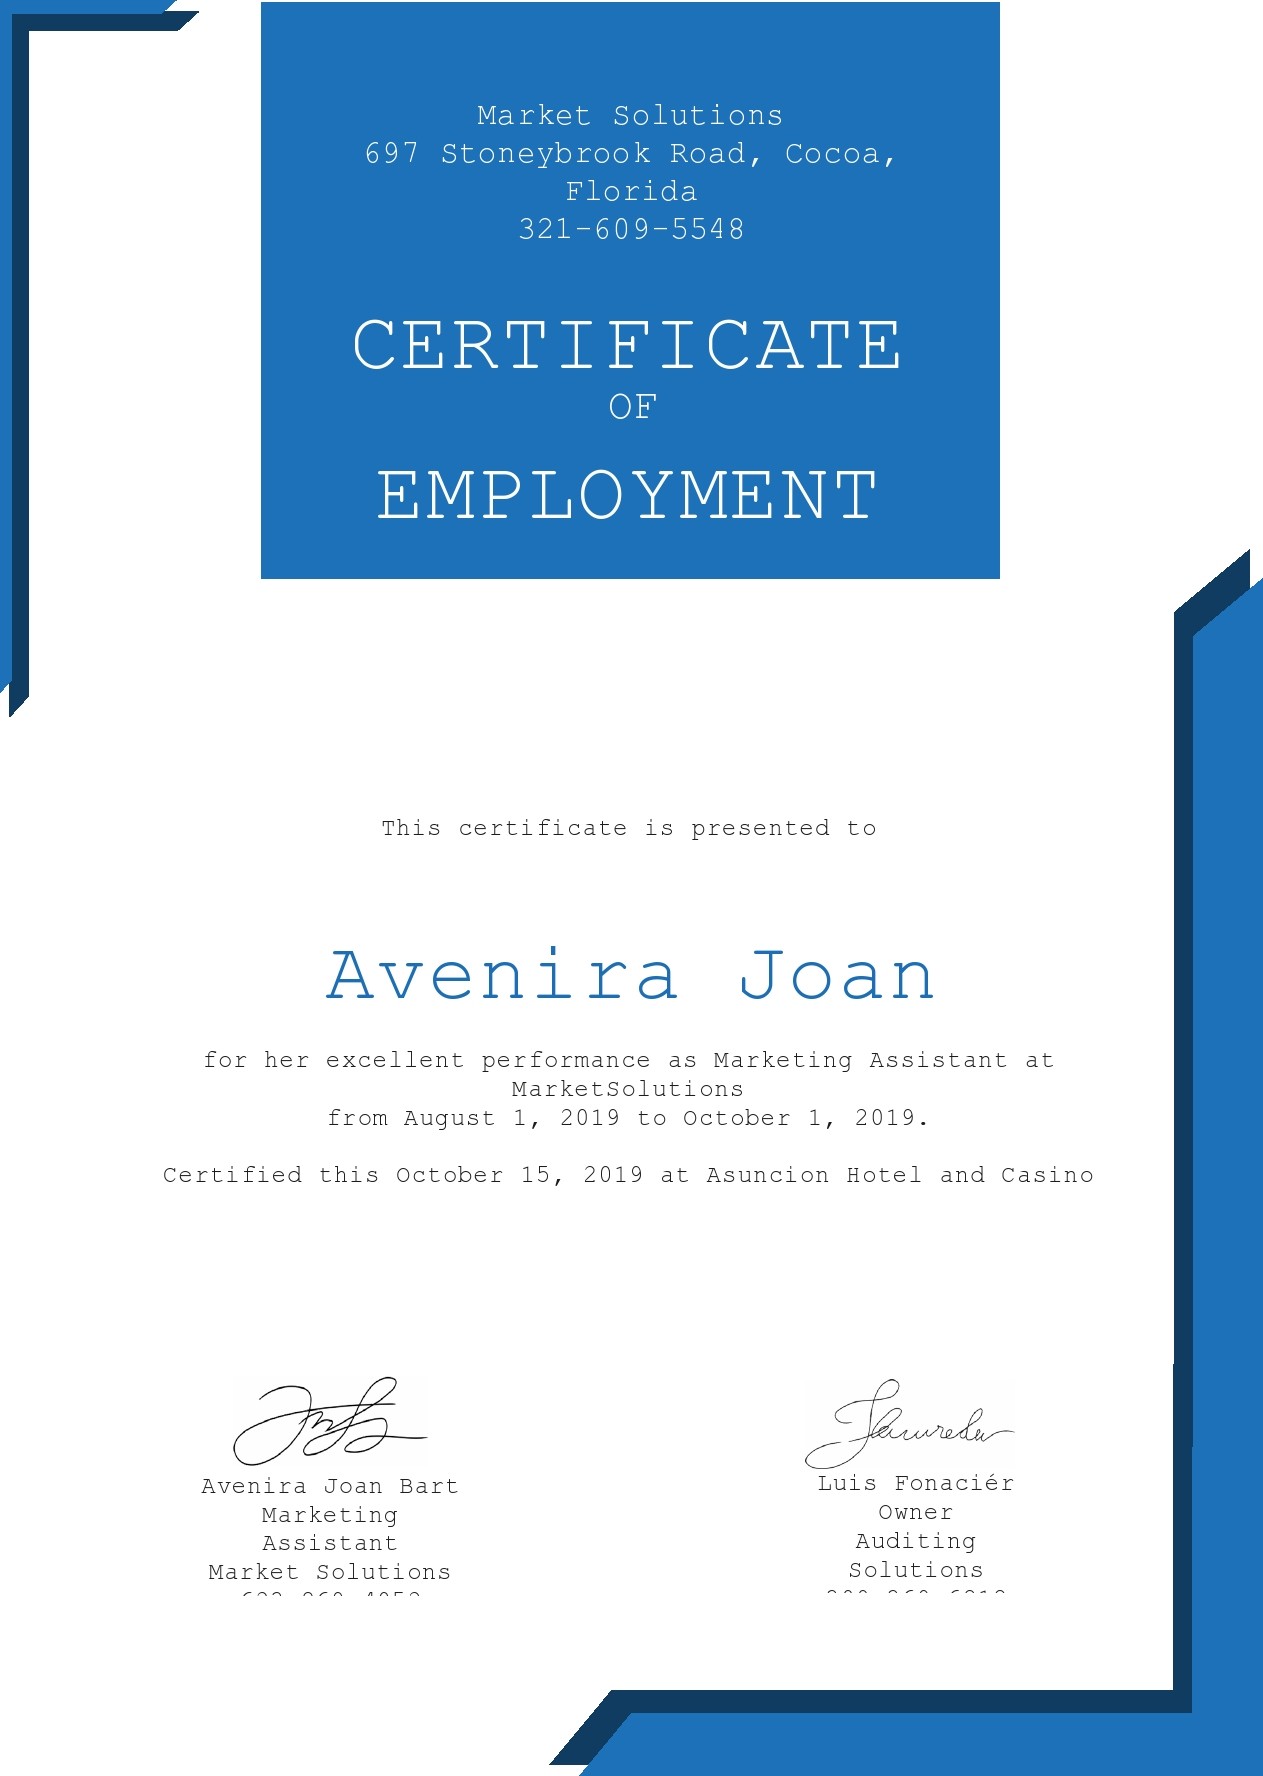 Free certificate of employment 29